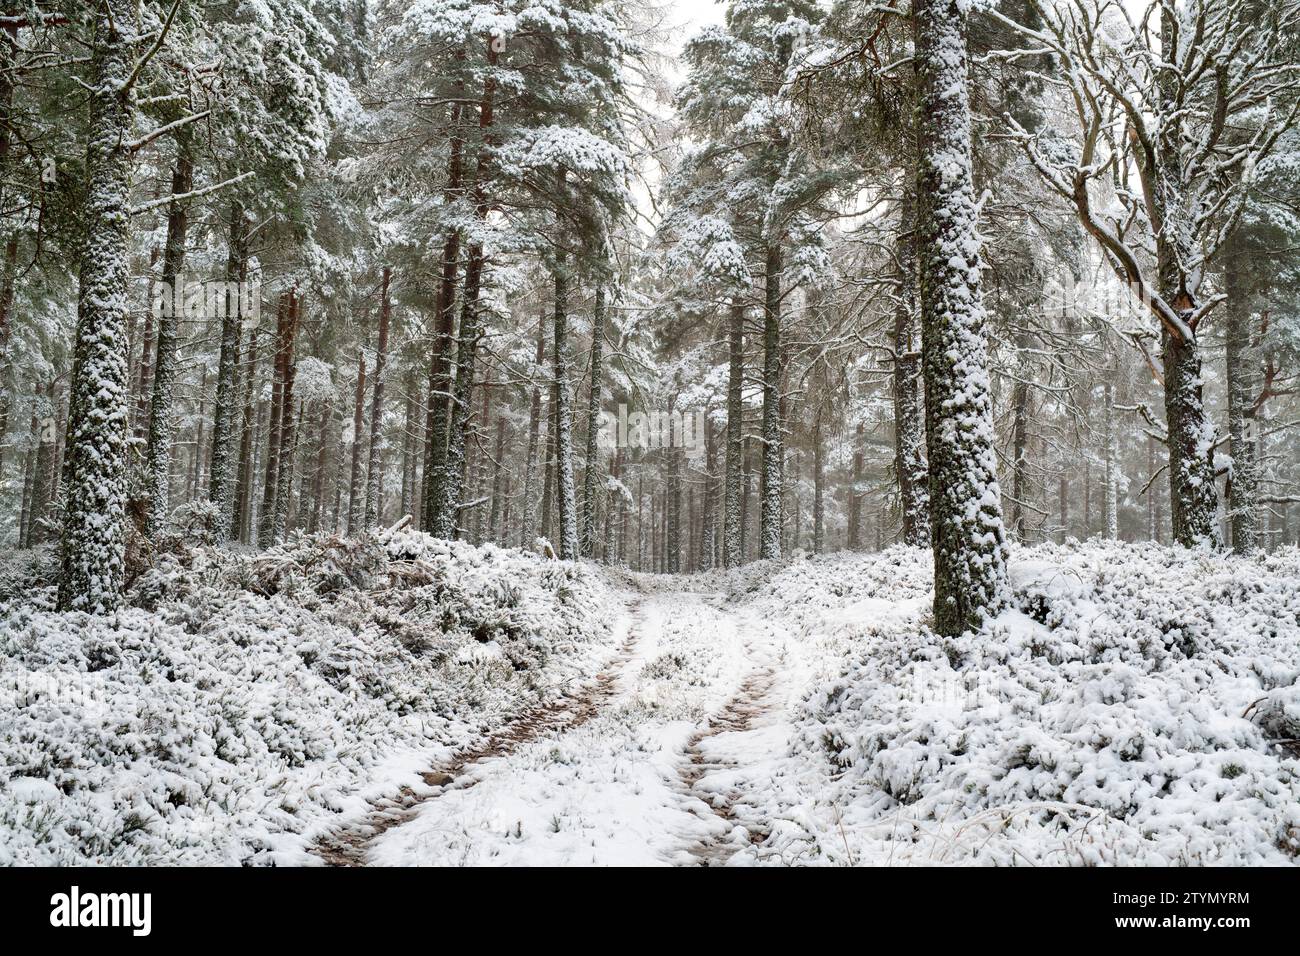 Track through scots pine trees in the snow. Highlands, Scotland Stock Photo